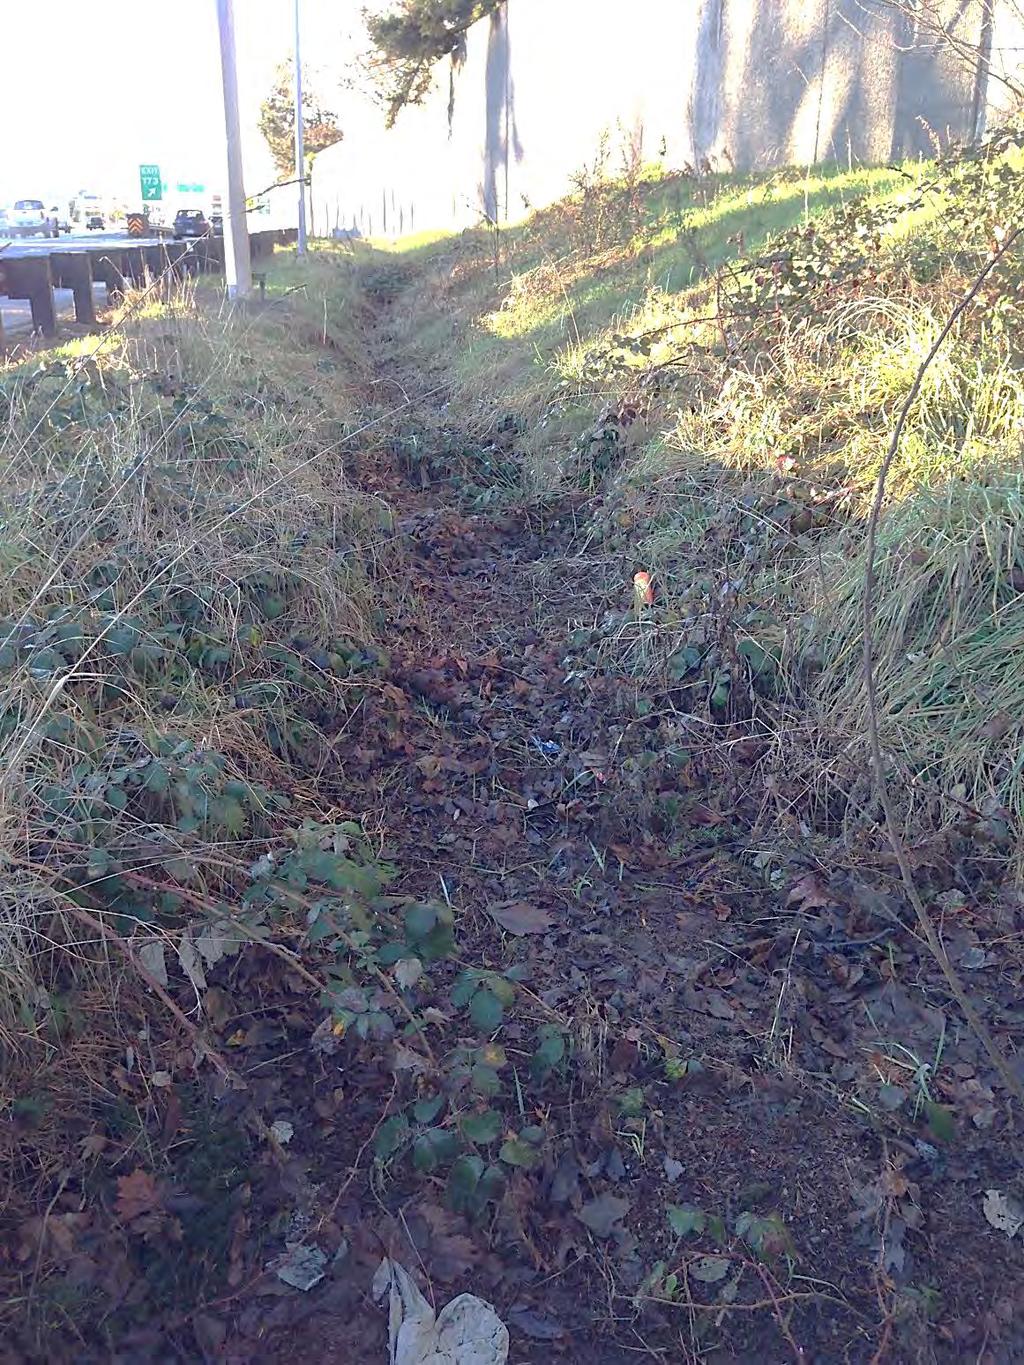 Ditch drains north Photo 4. Jurisdictional Ditch A: Jurisdictional Ditch A is located along the road shoulder to I-5.